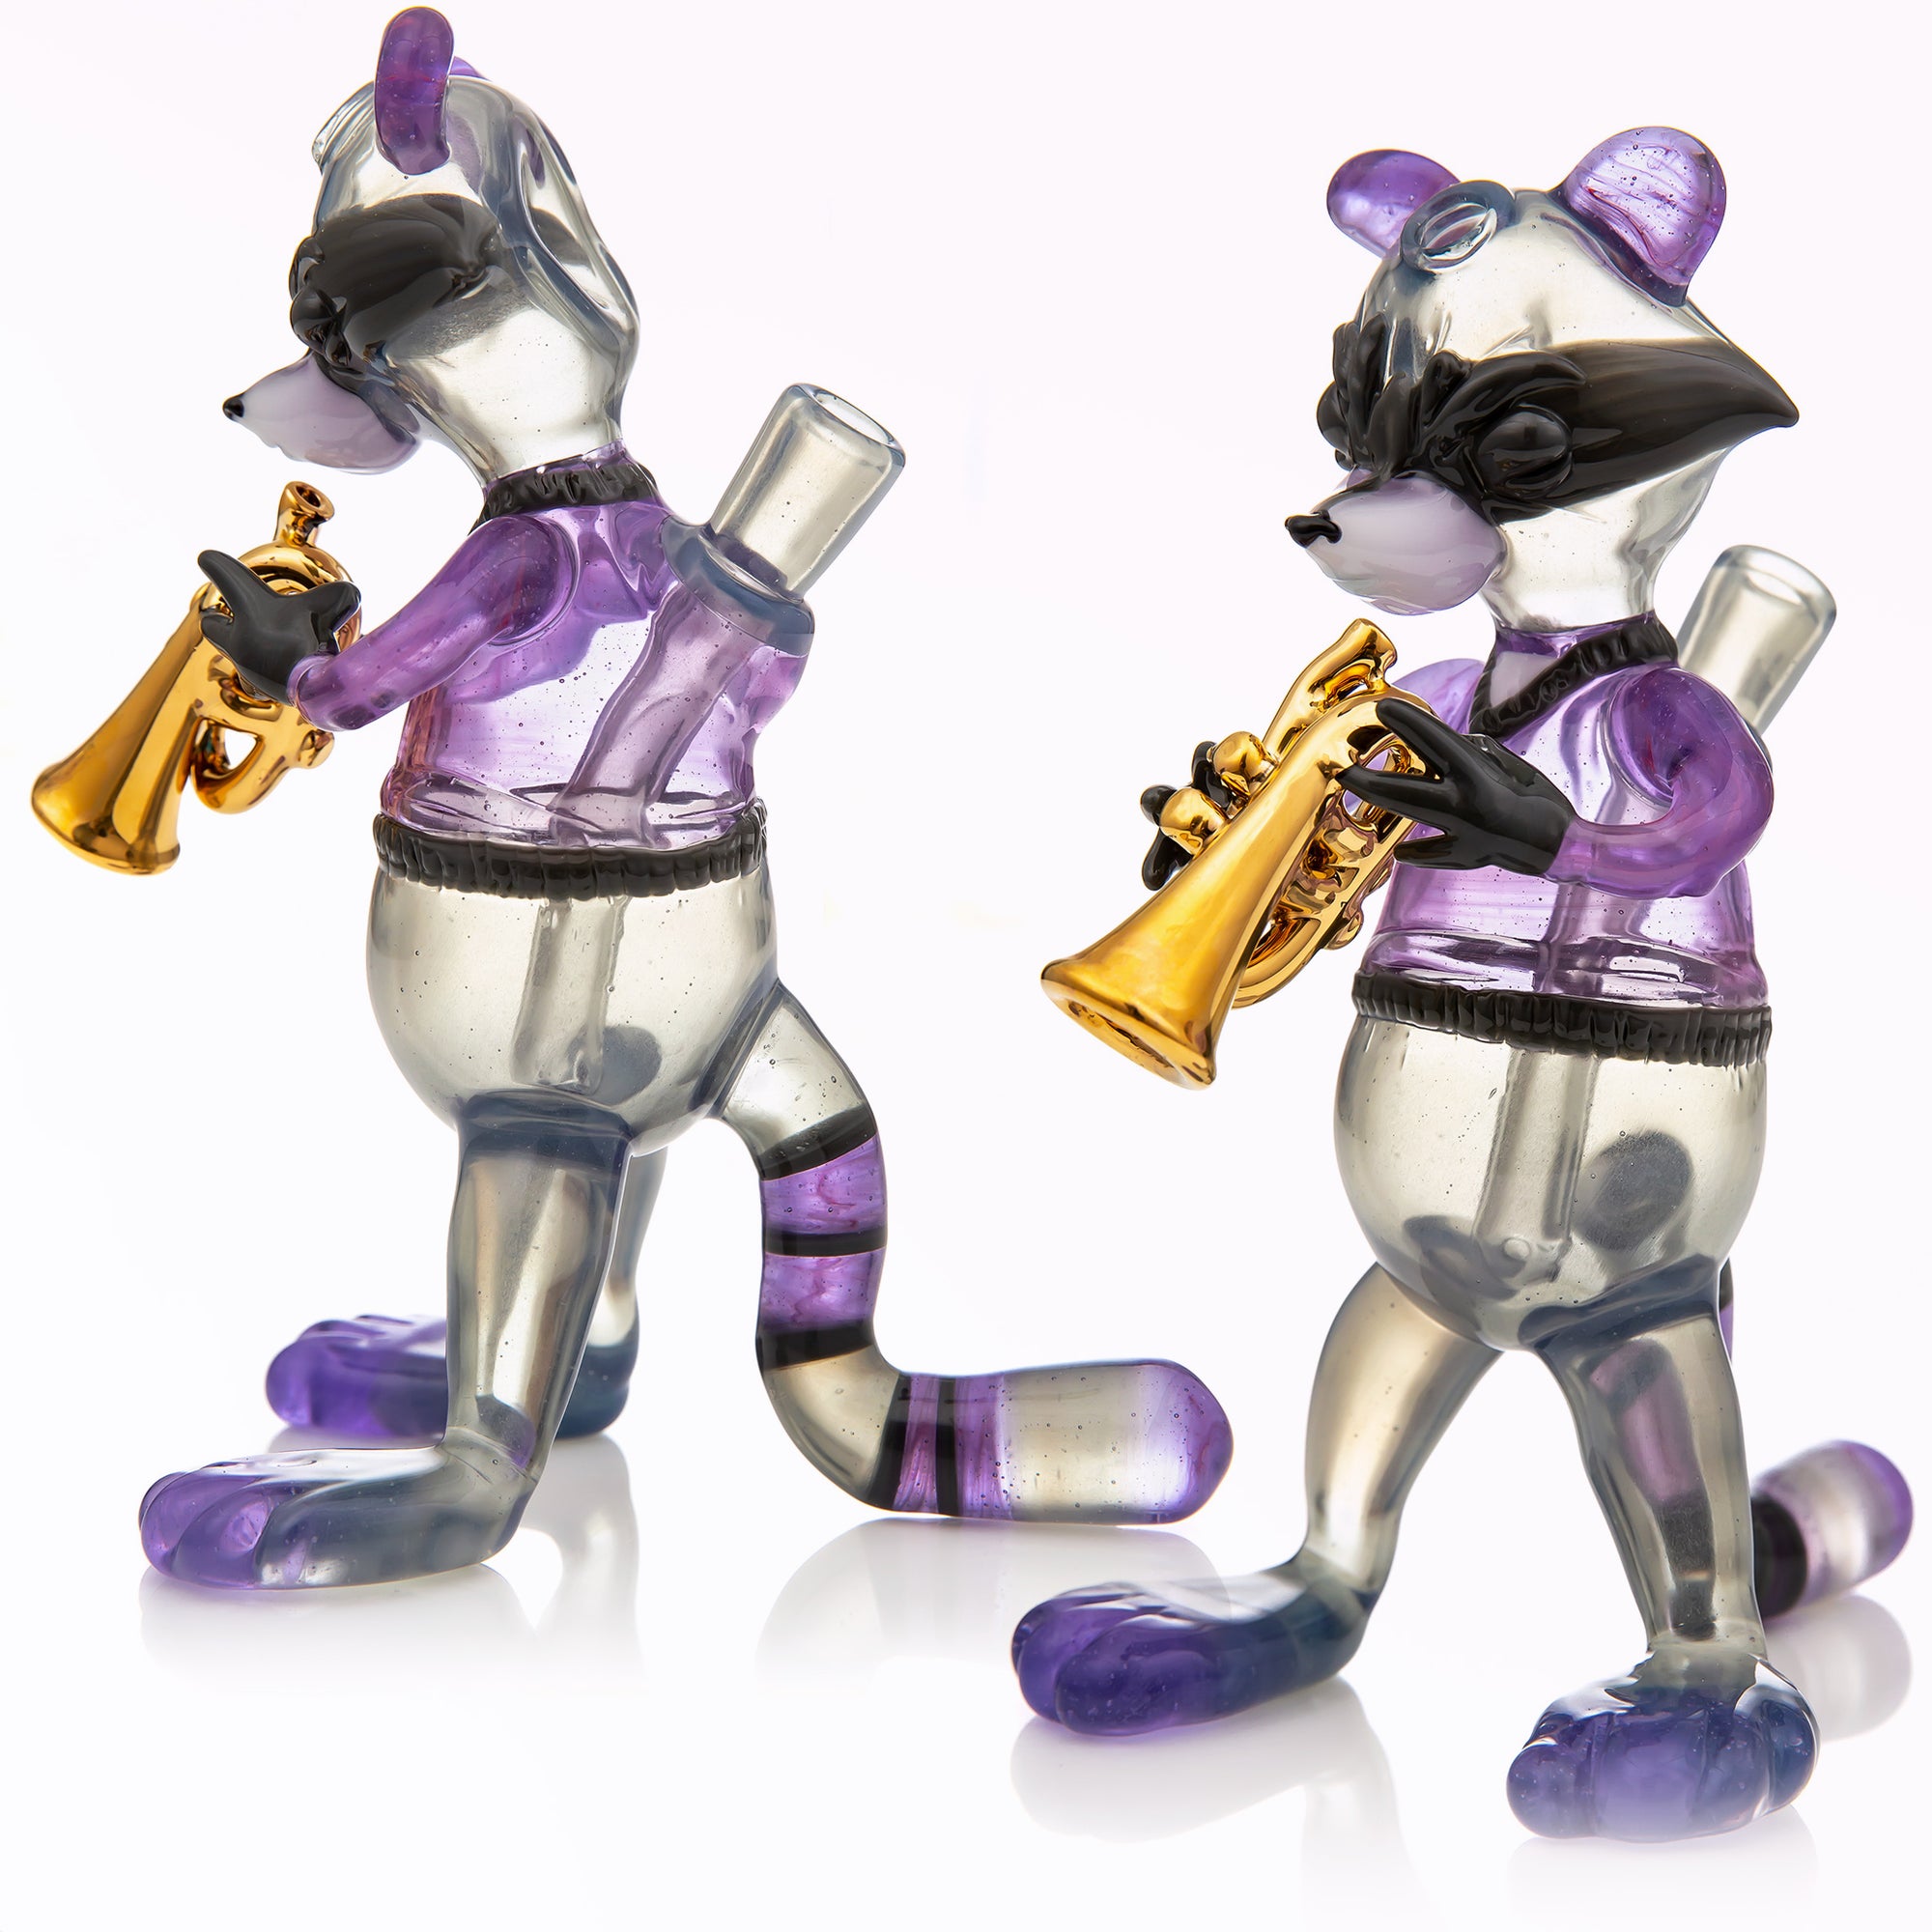 Two separate angles are shown in a studio photo edit of a heady glass raccoon piece by R3G15, the piece is a purple and grey raccoon playing a gold plated trumpet. 